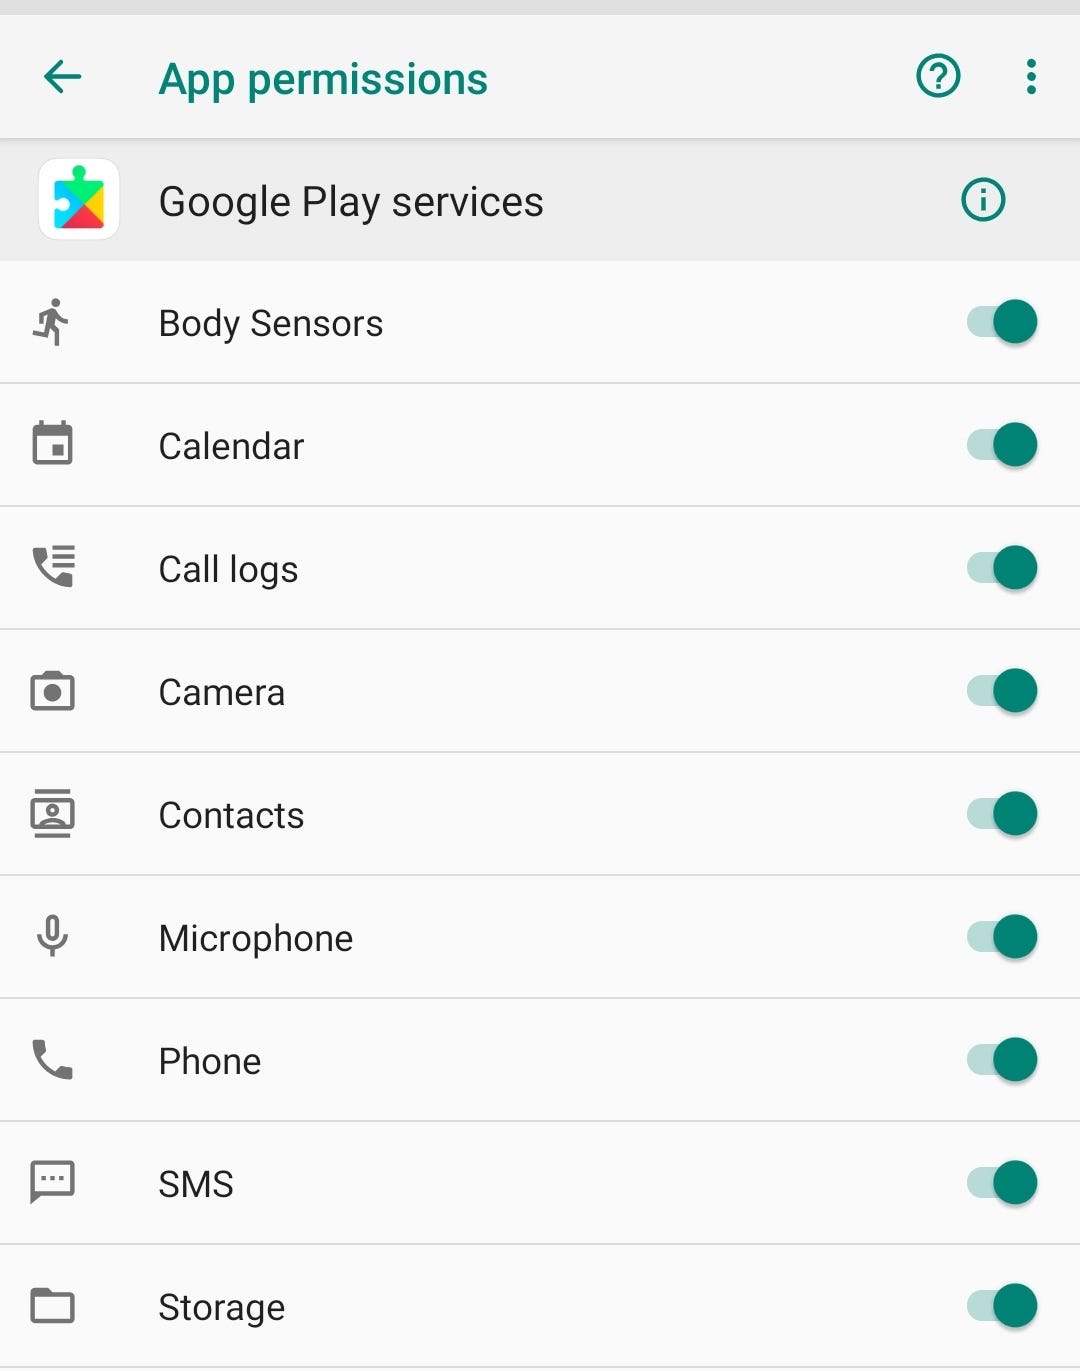 Google Play Services: Everything you need to know - Android Authority